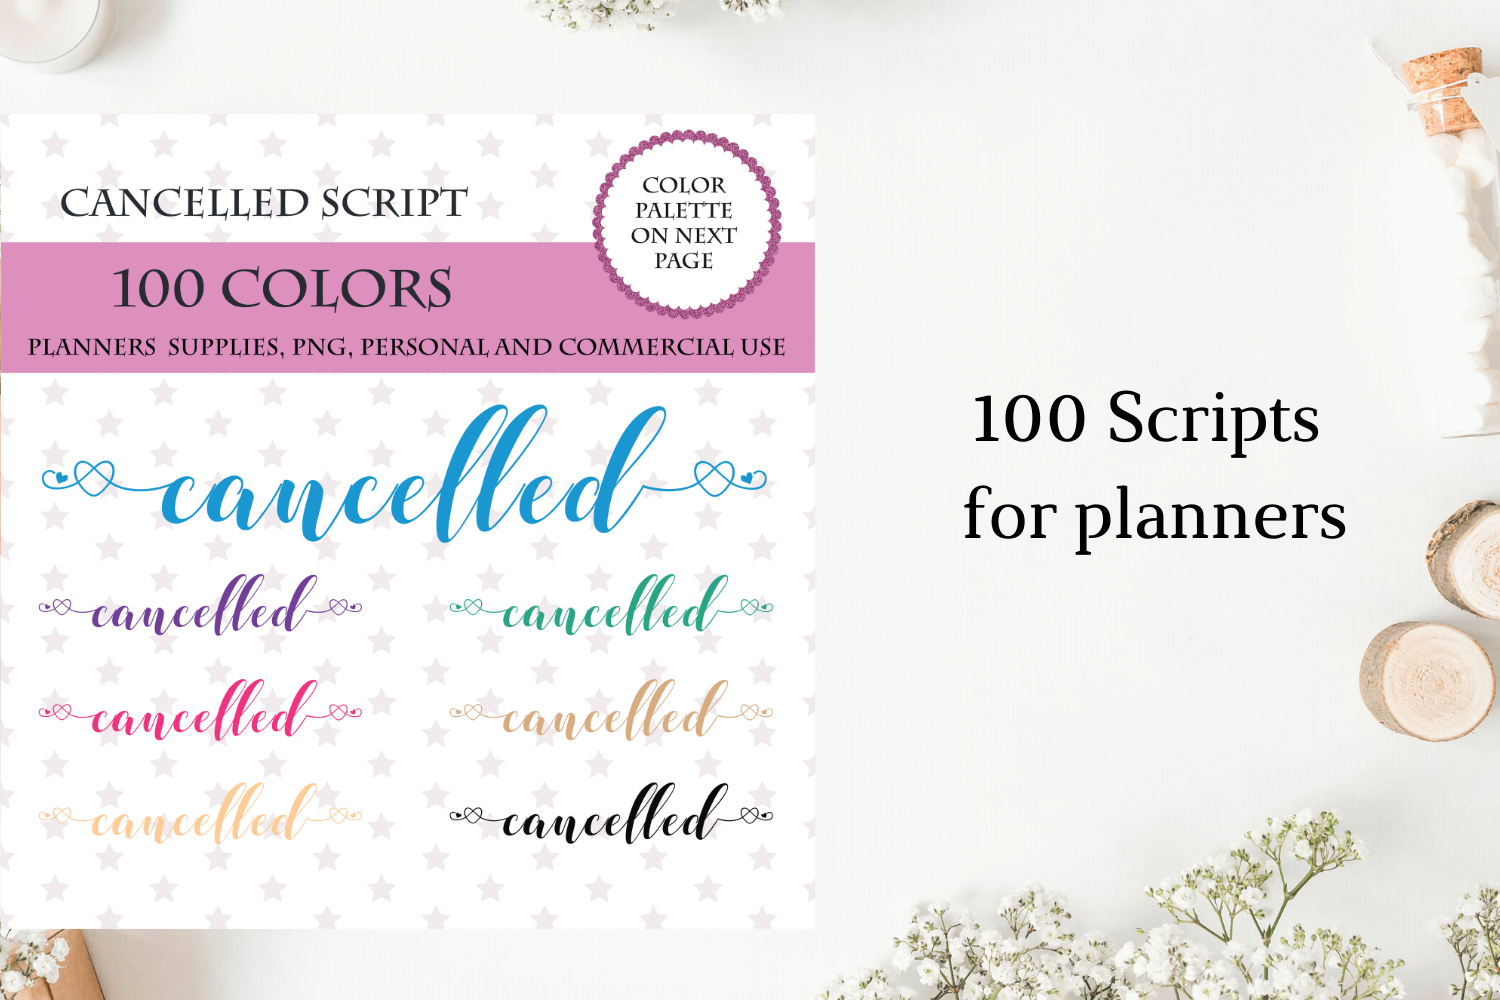 100 Cancelled Font Clipart Cancelled Sticker Clipart Cancelled Planner Cancelled Script By Old Continent Design Thehungryjpeg Com